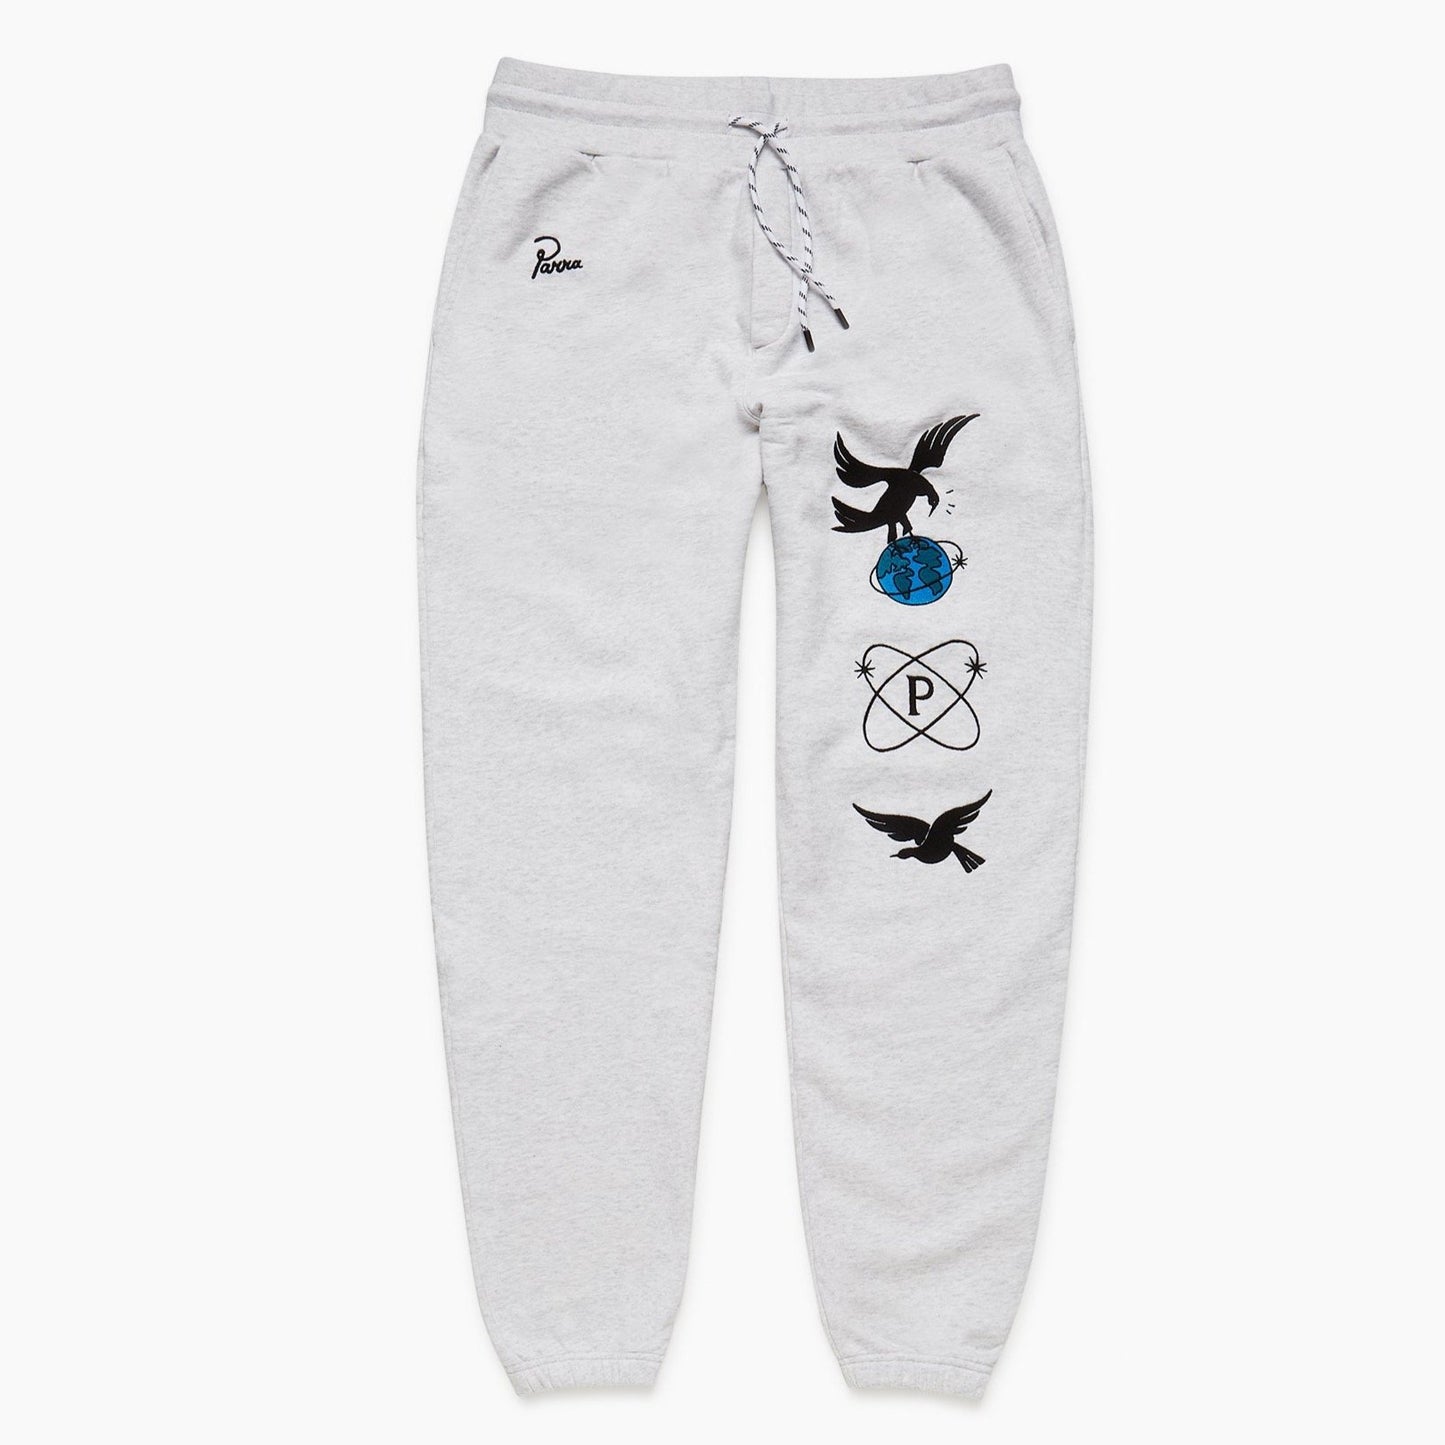 By Parra Bird Systems Sweatpant